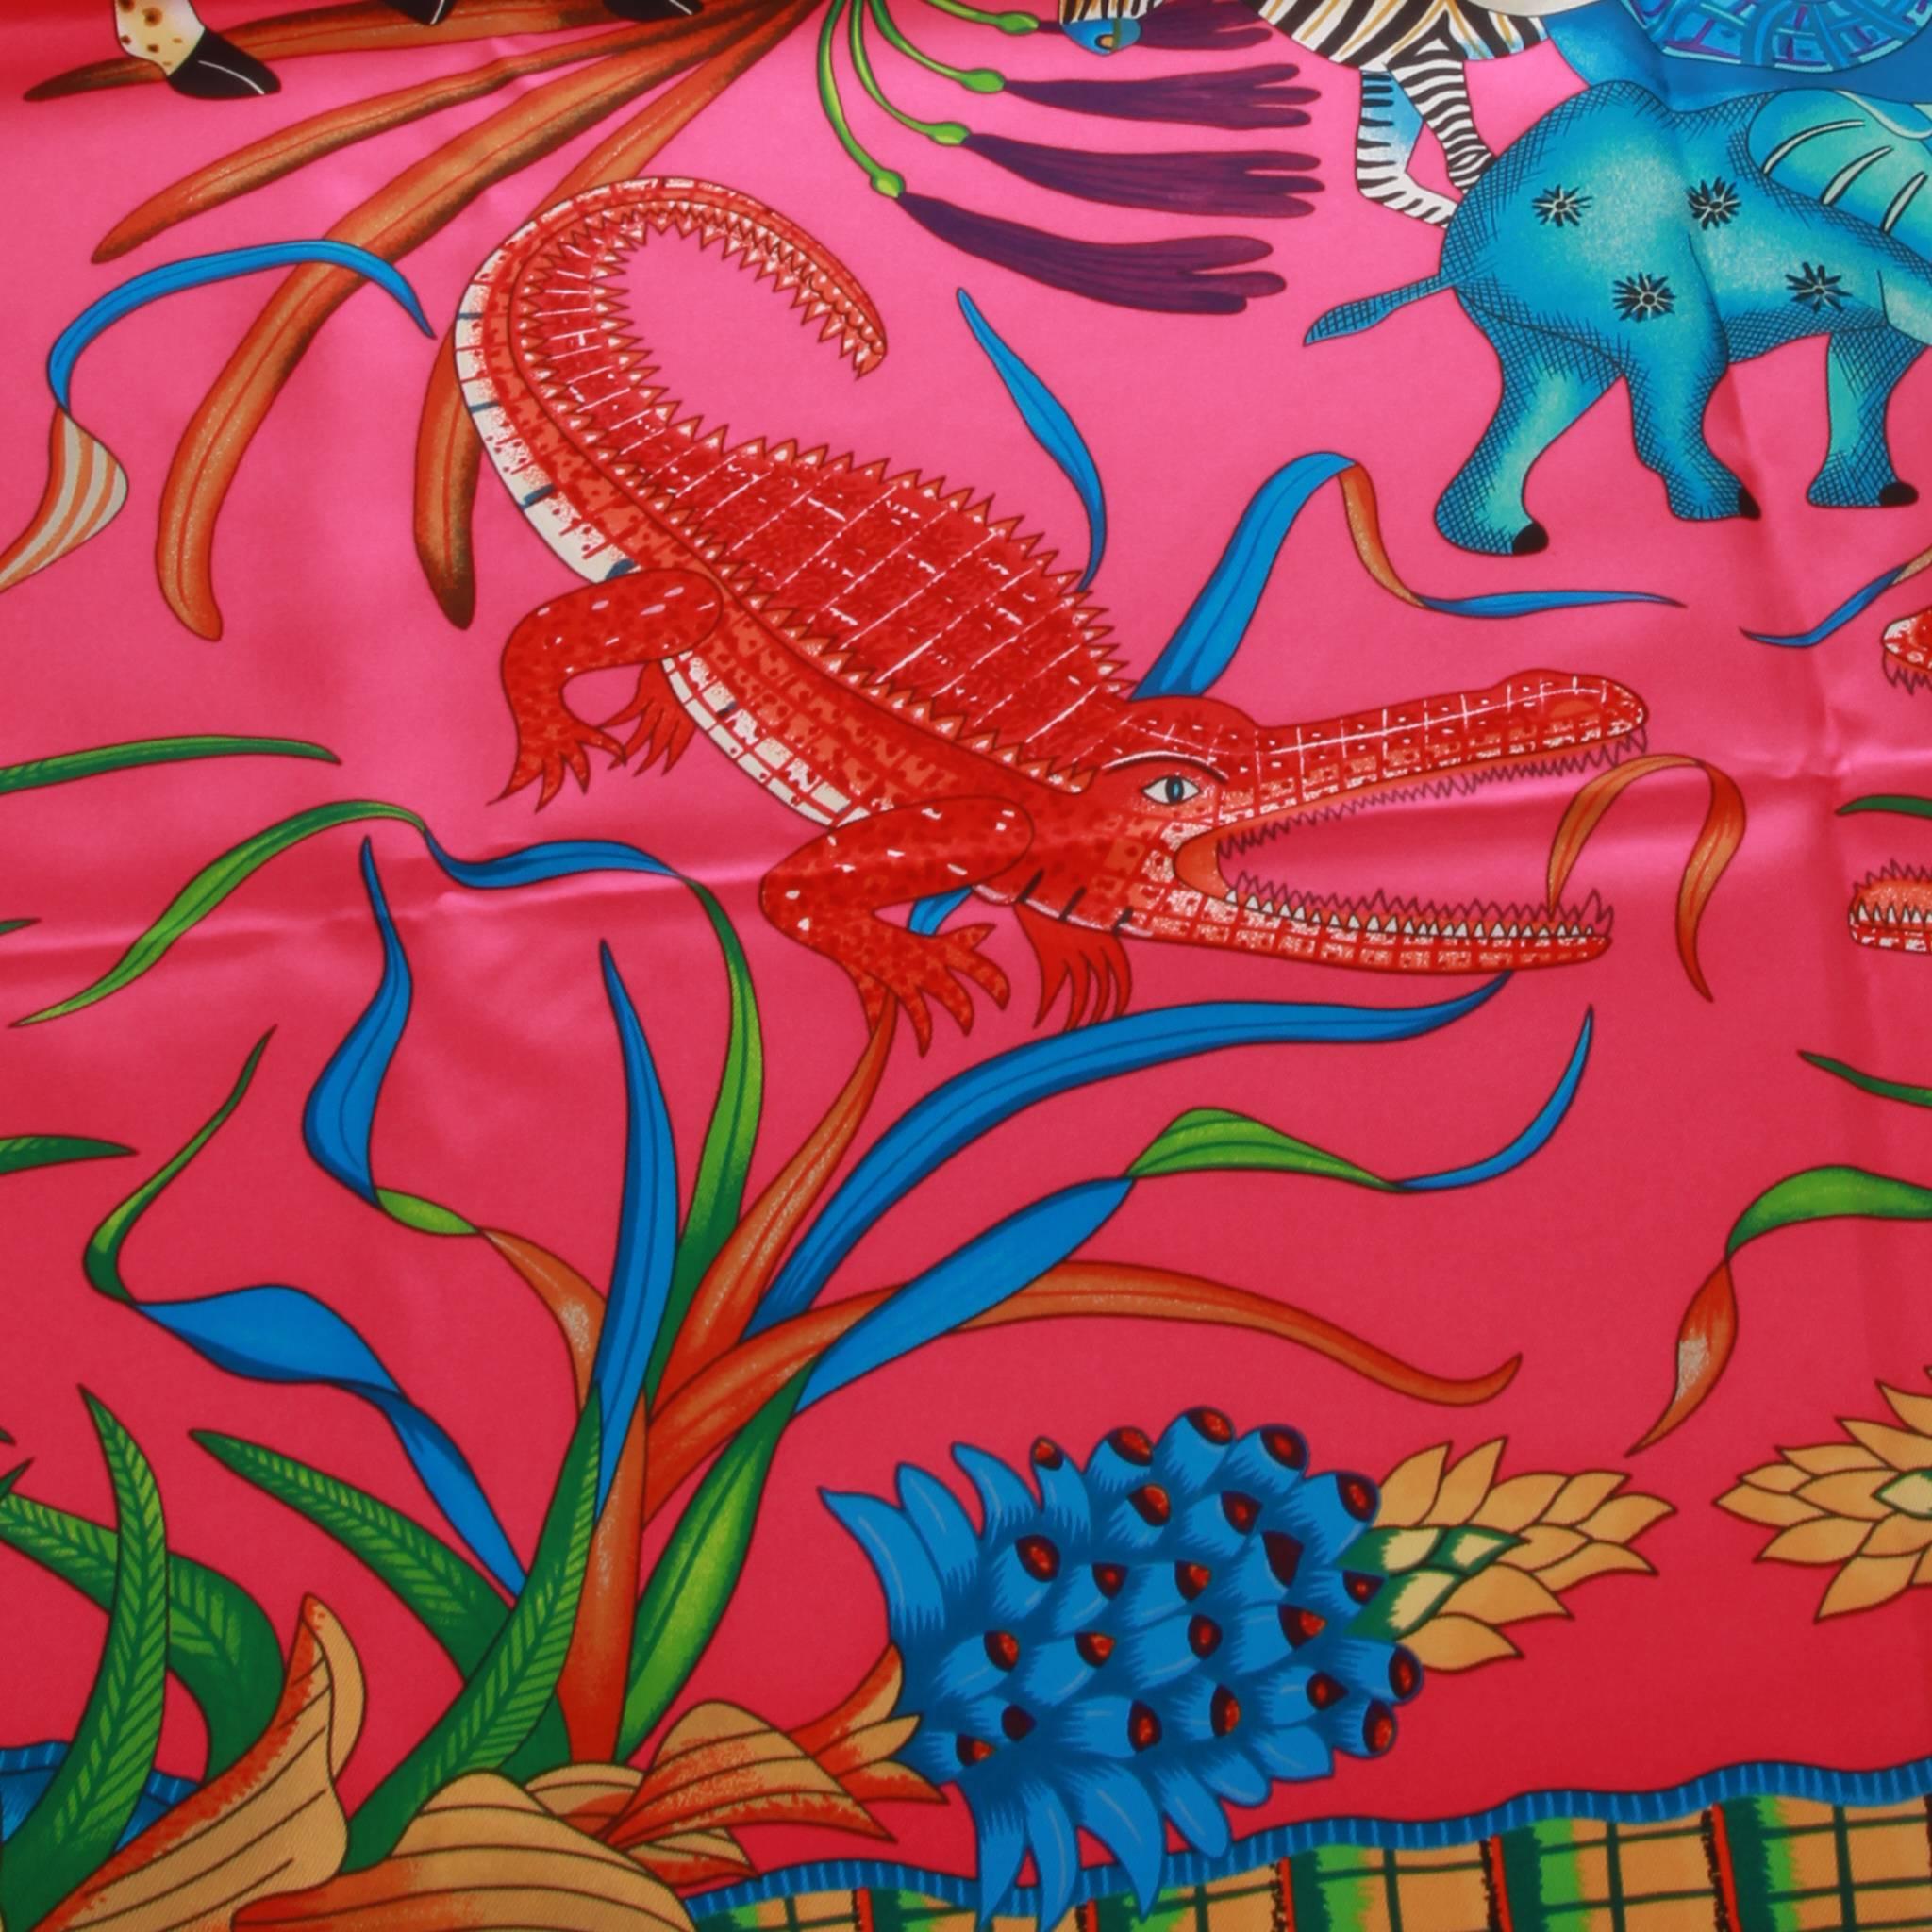 2016 Ardmore X Hermes La Marche du Zambeze silk scarf. In collaboration with South African Ardmore Artists this beautiful silk scarf features imagery of a central desert elephant surrounded by other creatures of Zambezi with indigenous floral motifs